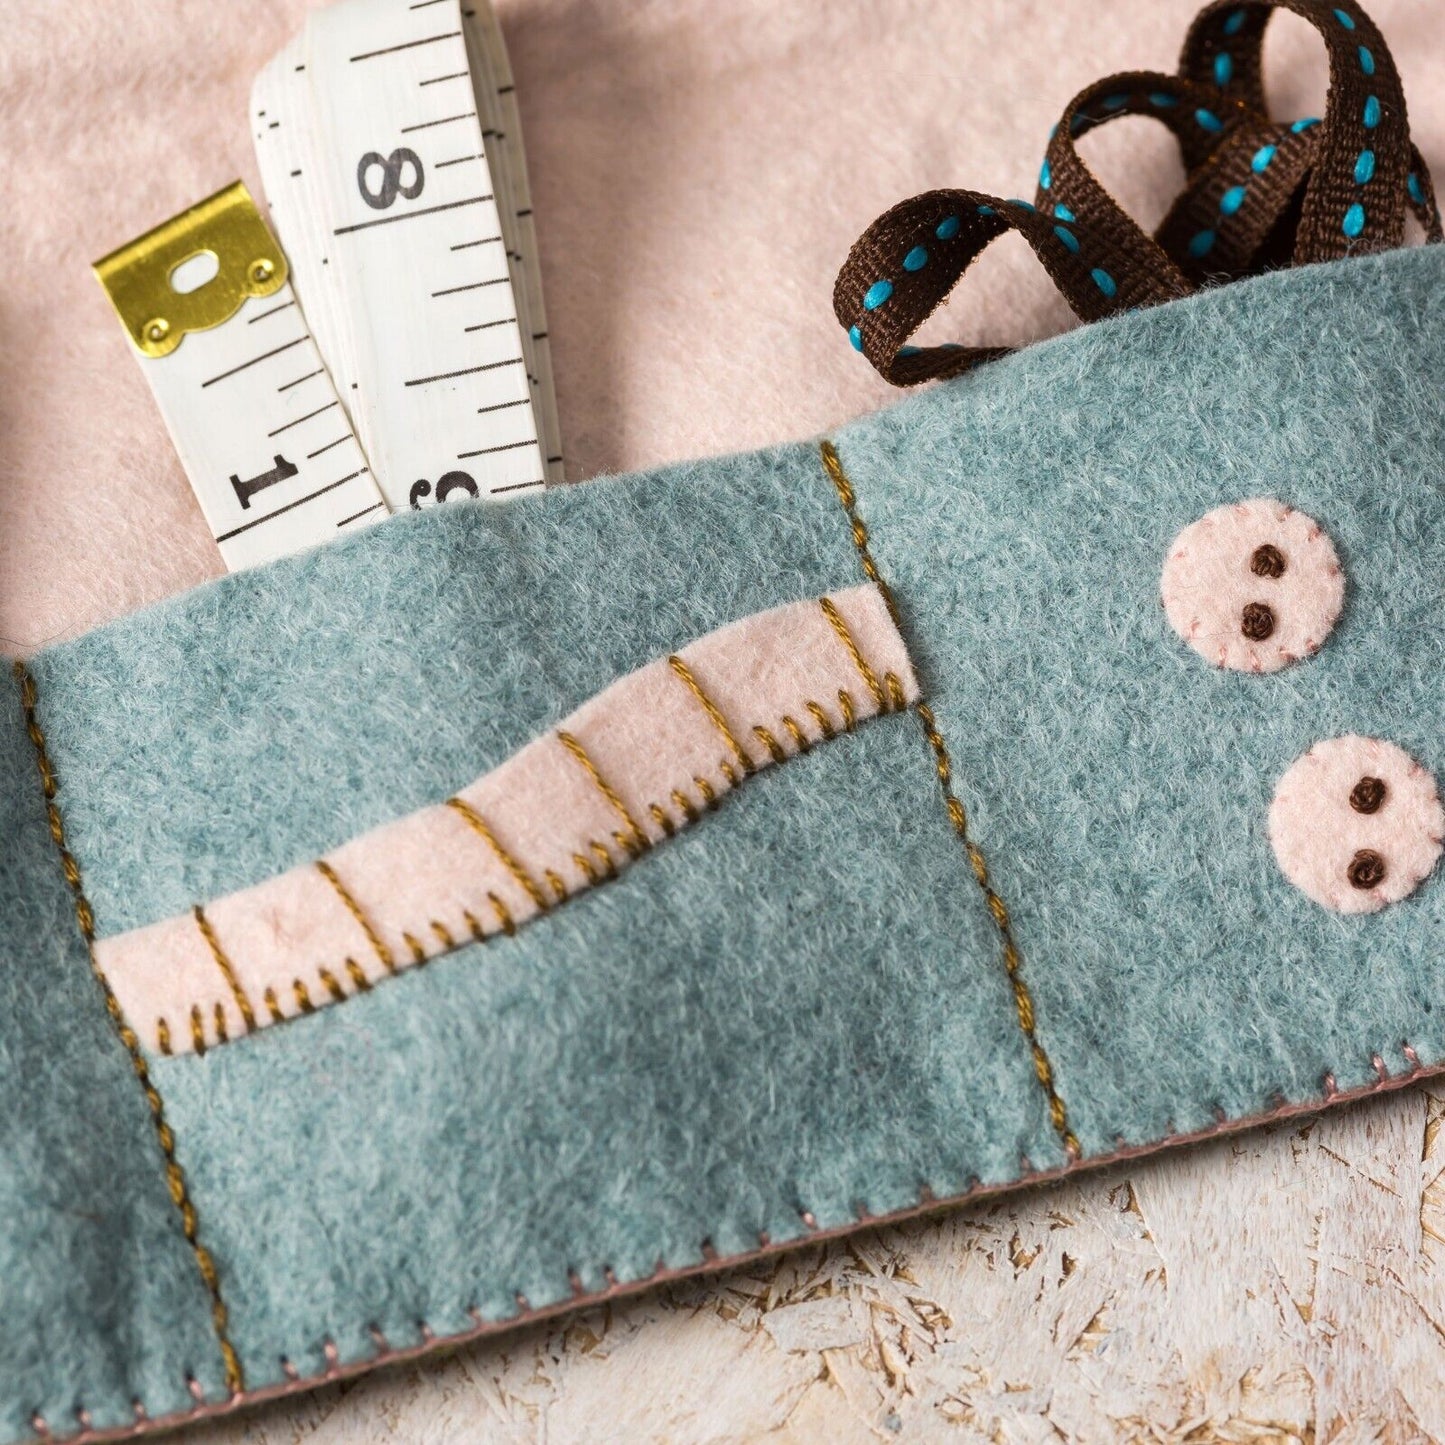 Sewing Roll Felt Craft Kit By Corinne Lapierre